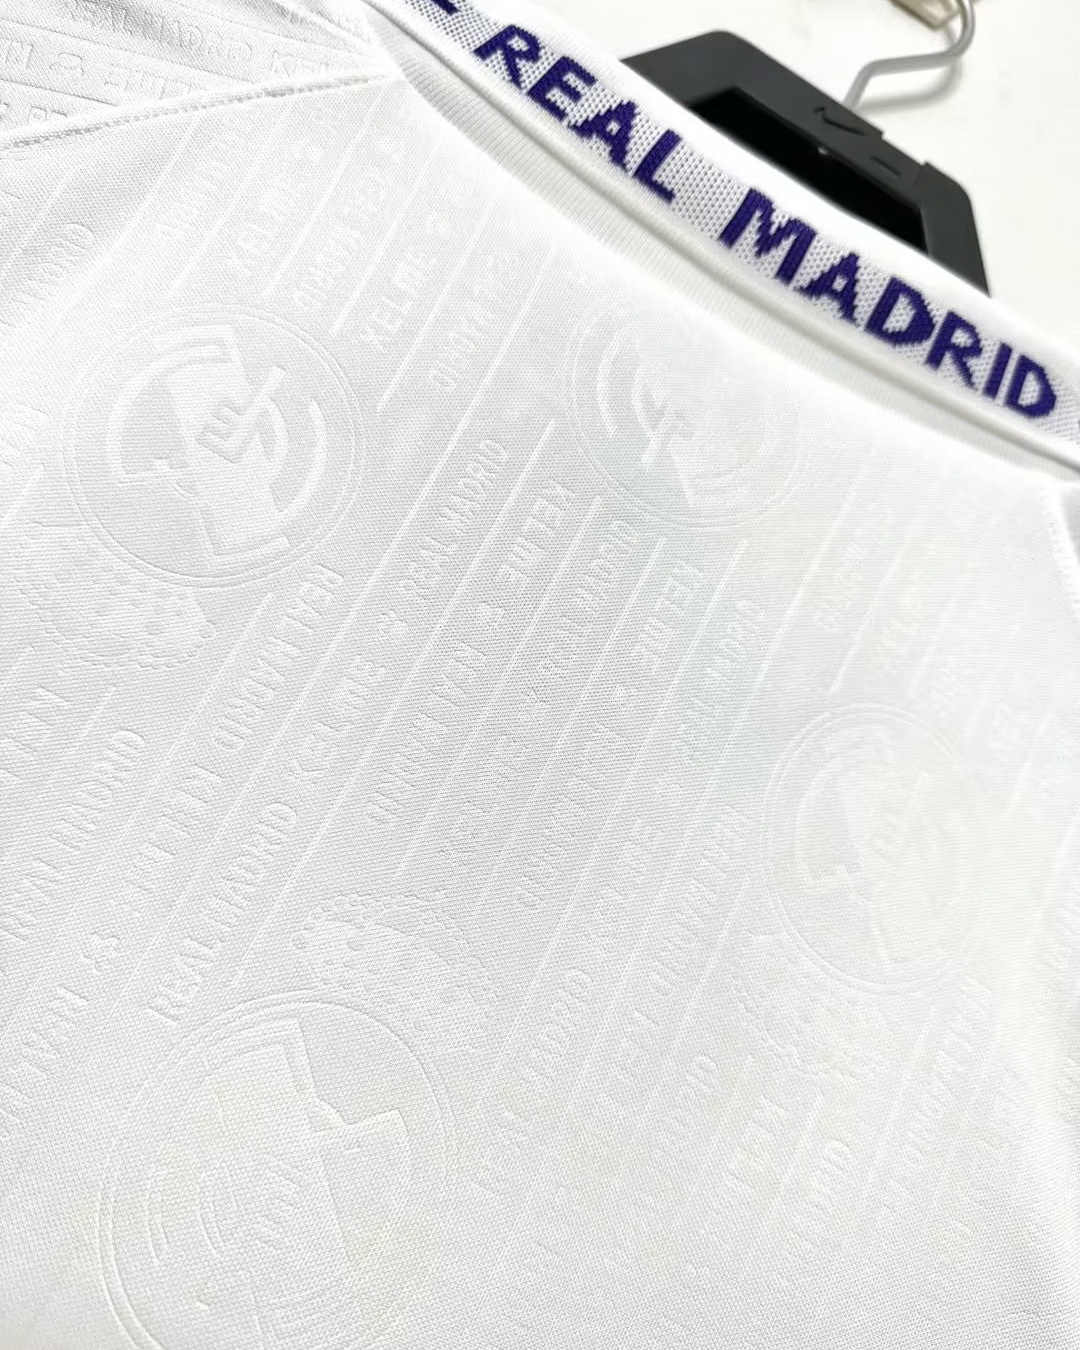 Real Madrid 1996/97 Home Soccer Jersey